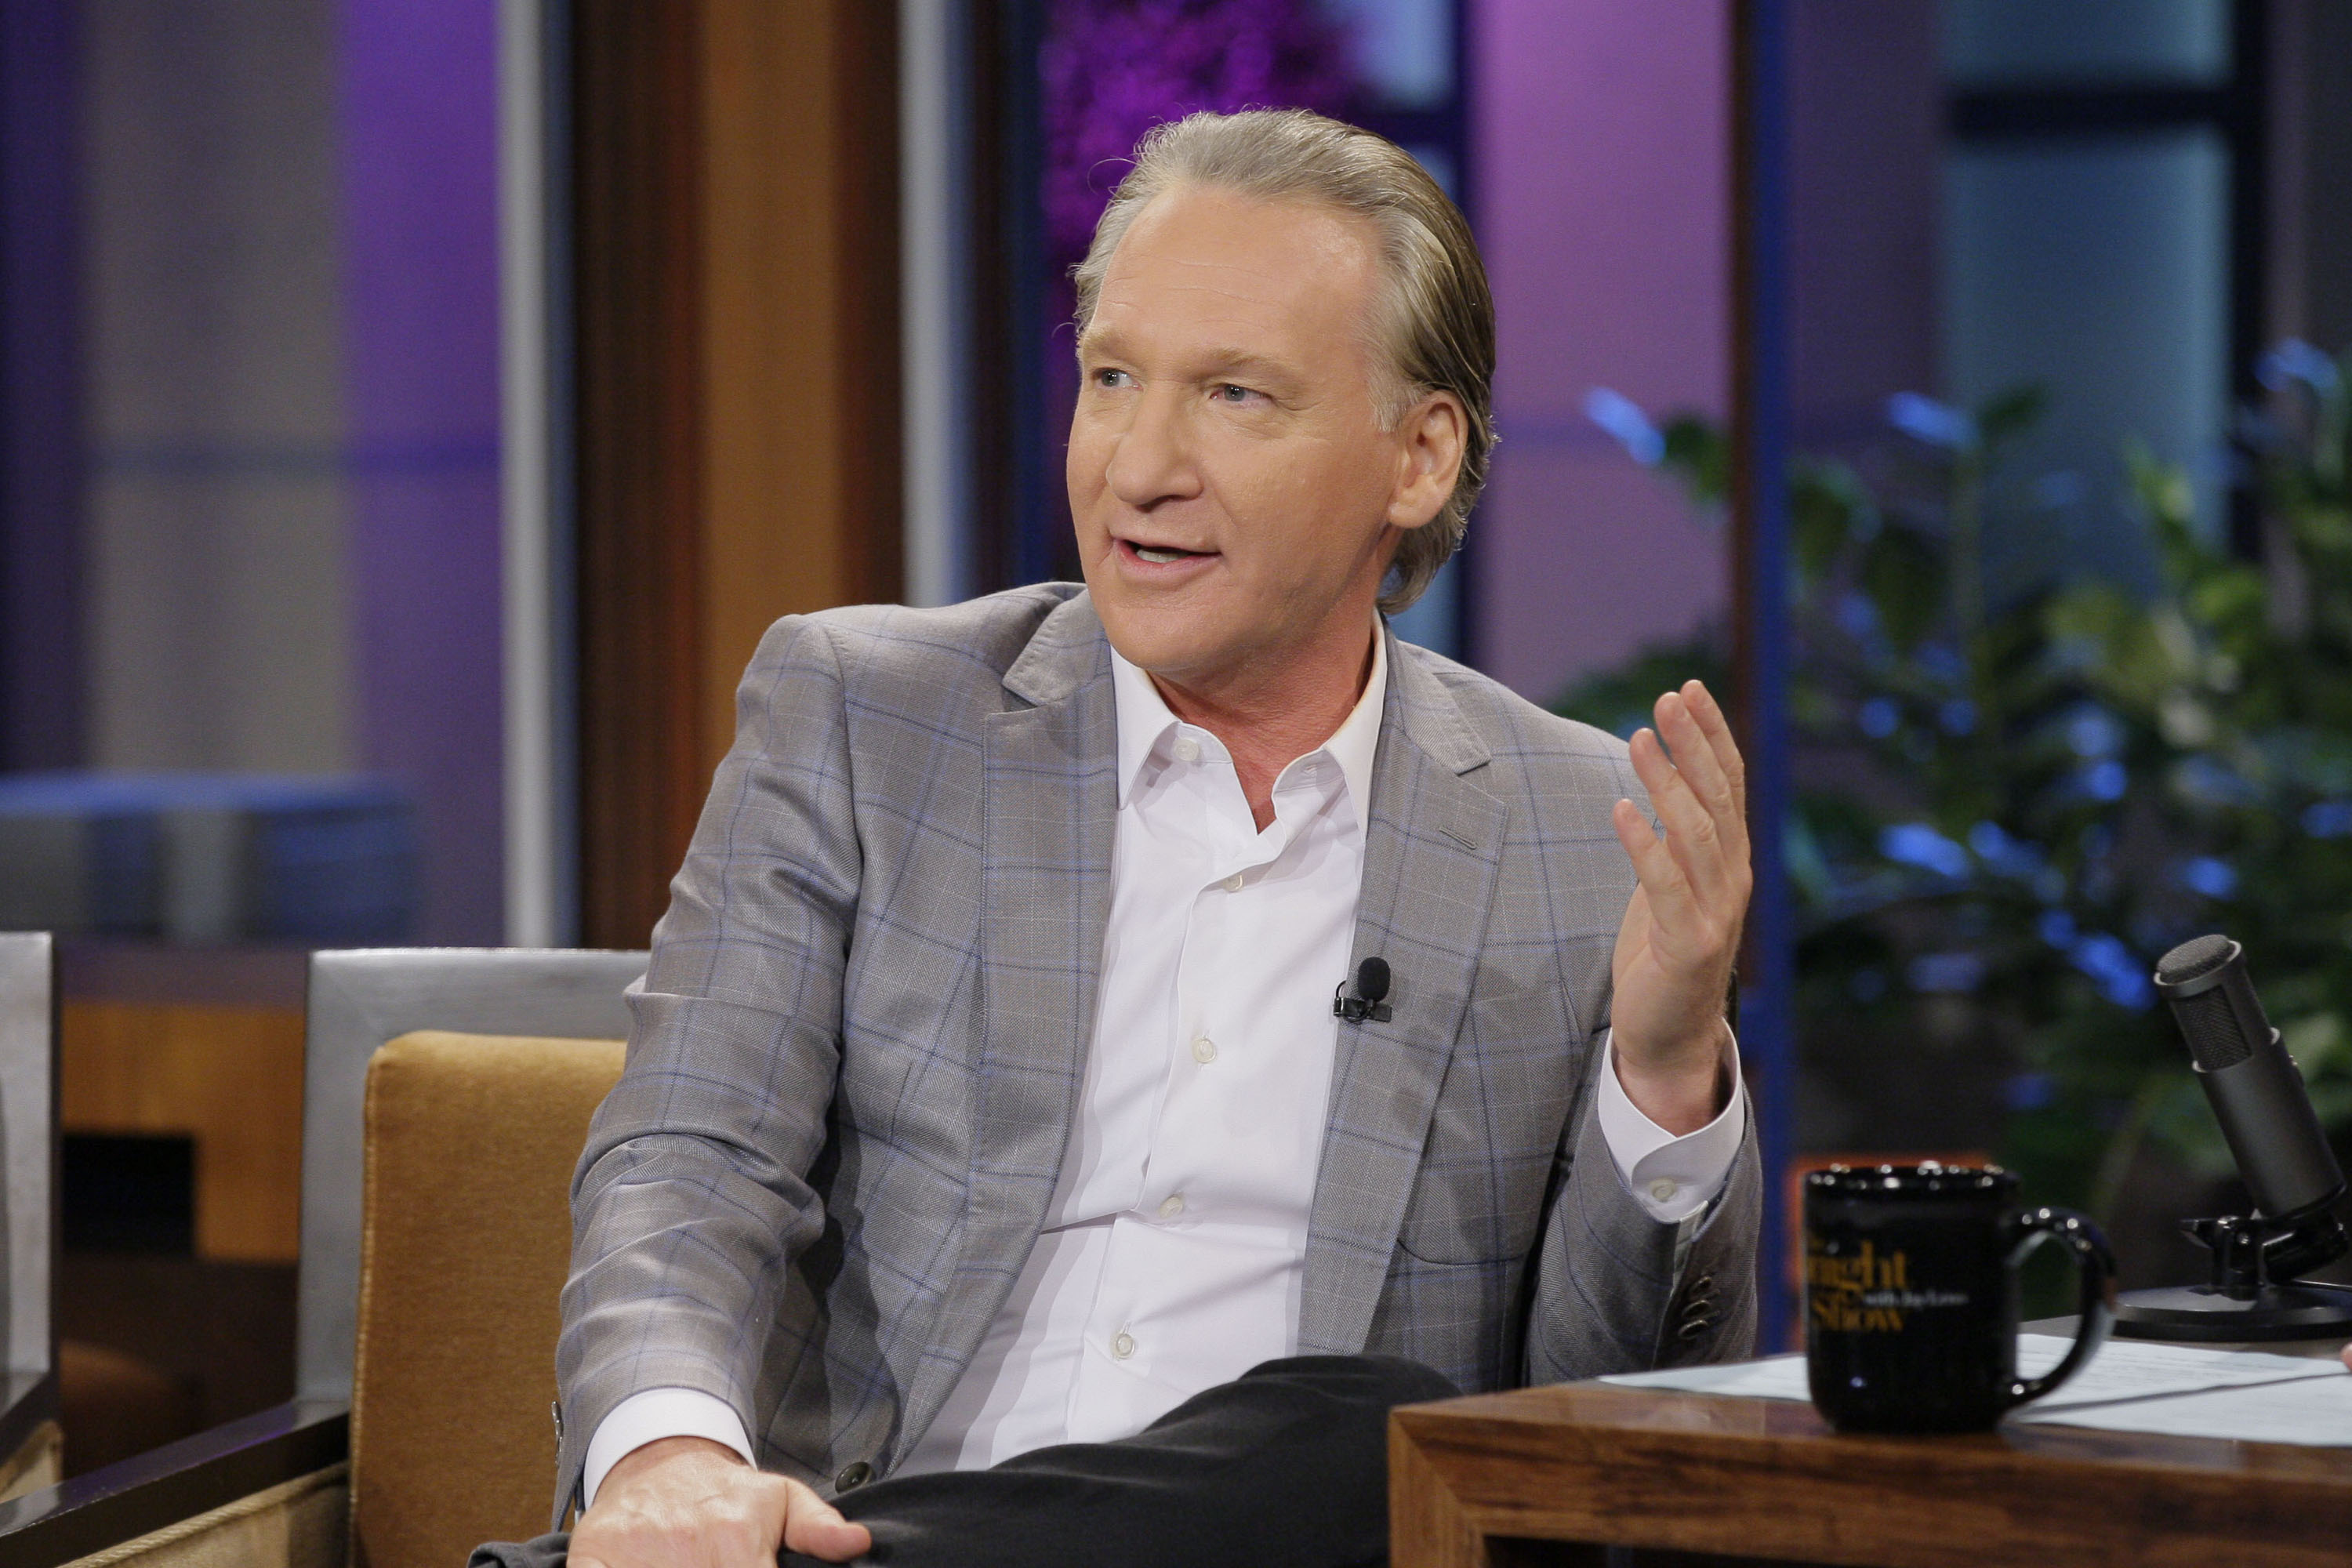 Comedian Bill Maher during an interview with Jay Leno on September 3, 2013. (NBC—NBCU Photo Bank via Getty Images)